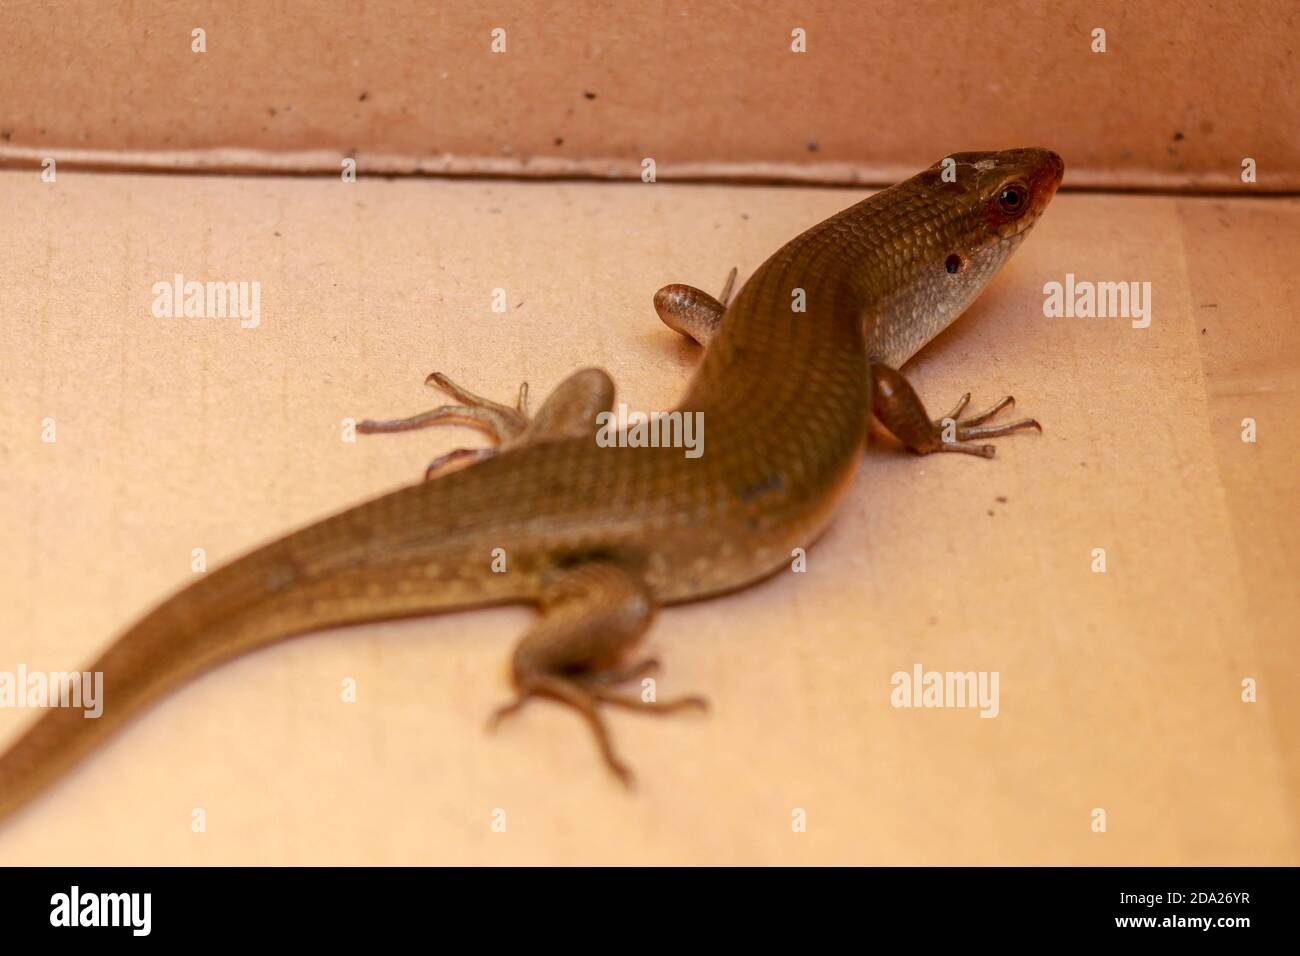 The Common Sun Skink are generally bronzey brown with various patterns: black stripes down the back, sides of the body may be blackish and underside Stock Photo